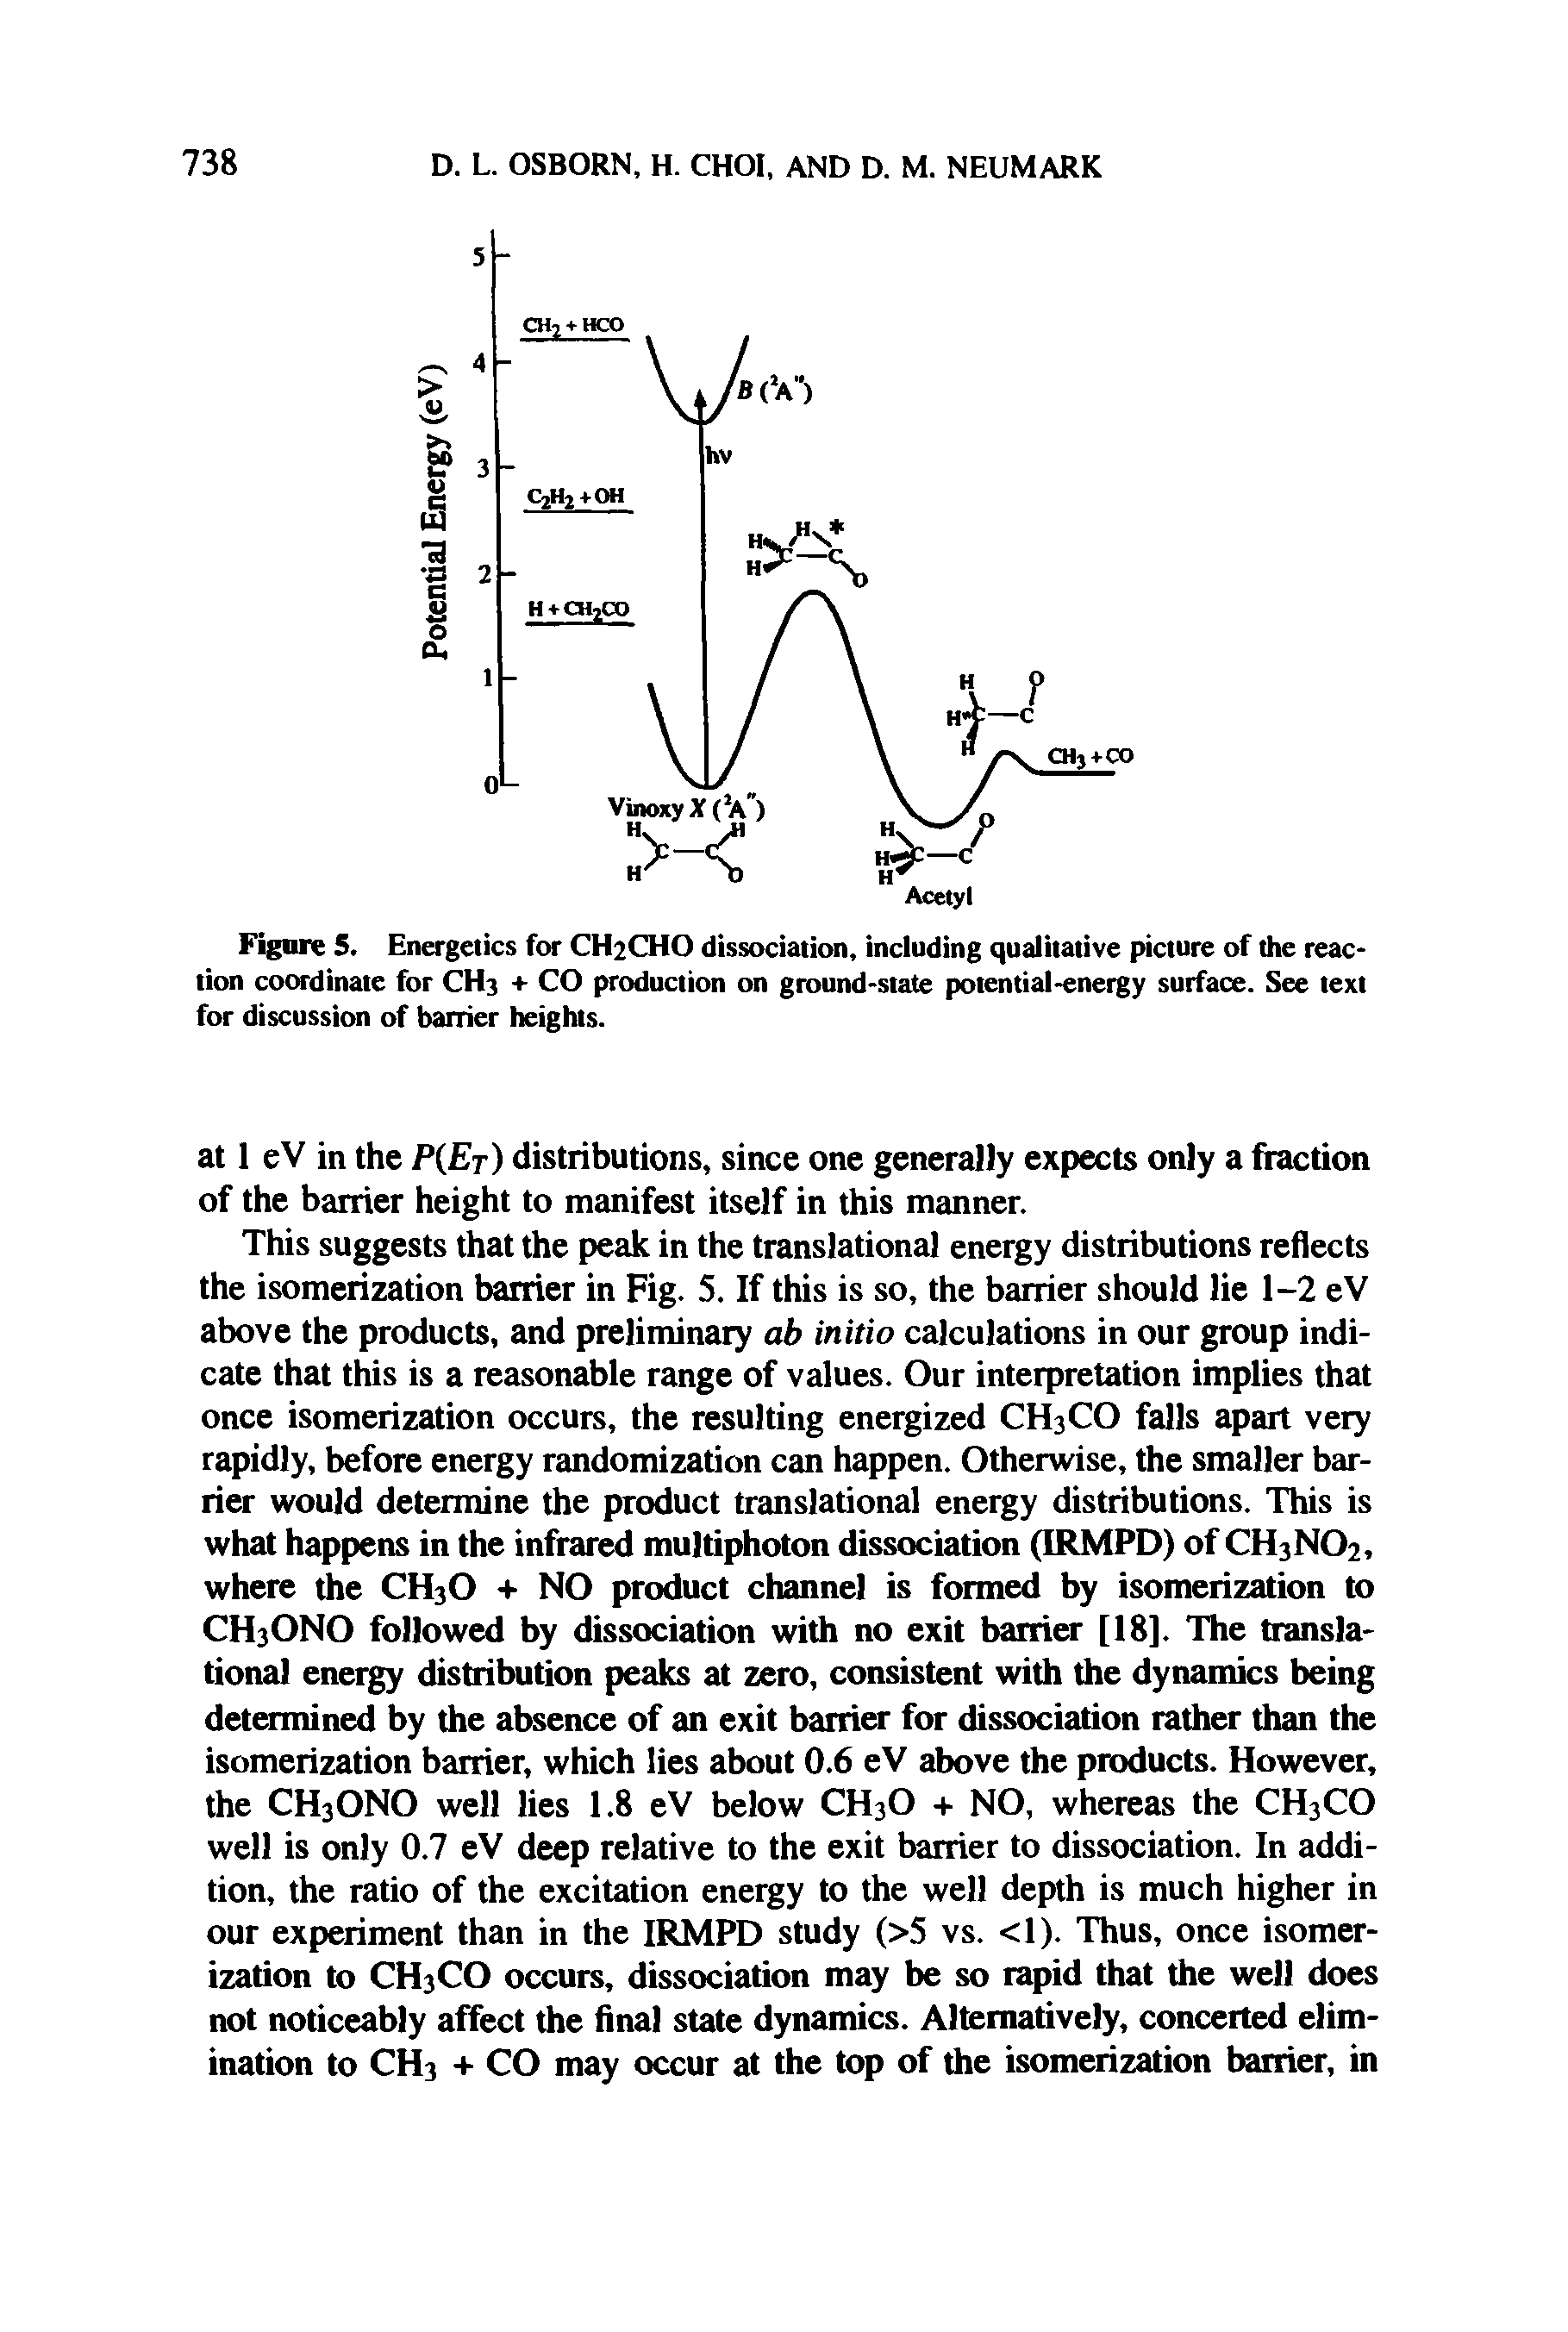 Figure 5. Energetics for CH2CHO dissociation, including qualitative picture of the reaction coordinate for CH3 + CO production on ground-state potential-energy surface. See text for discussion of barrier heights.